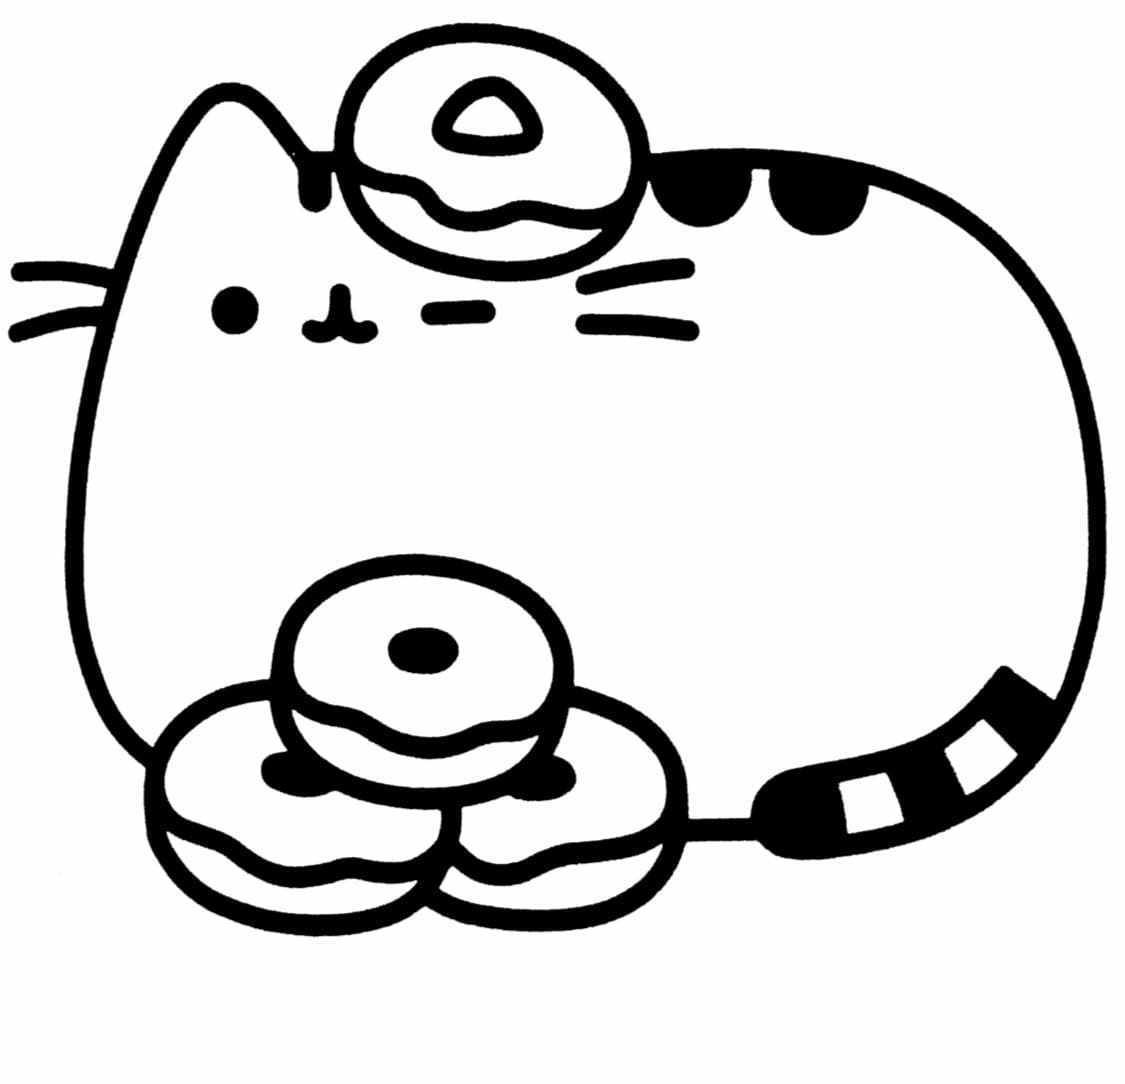 New Image Pushen Cat Coloring Pages Pusheen Coloring Pages Coloring Pages For Kids And Adults